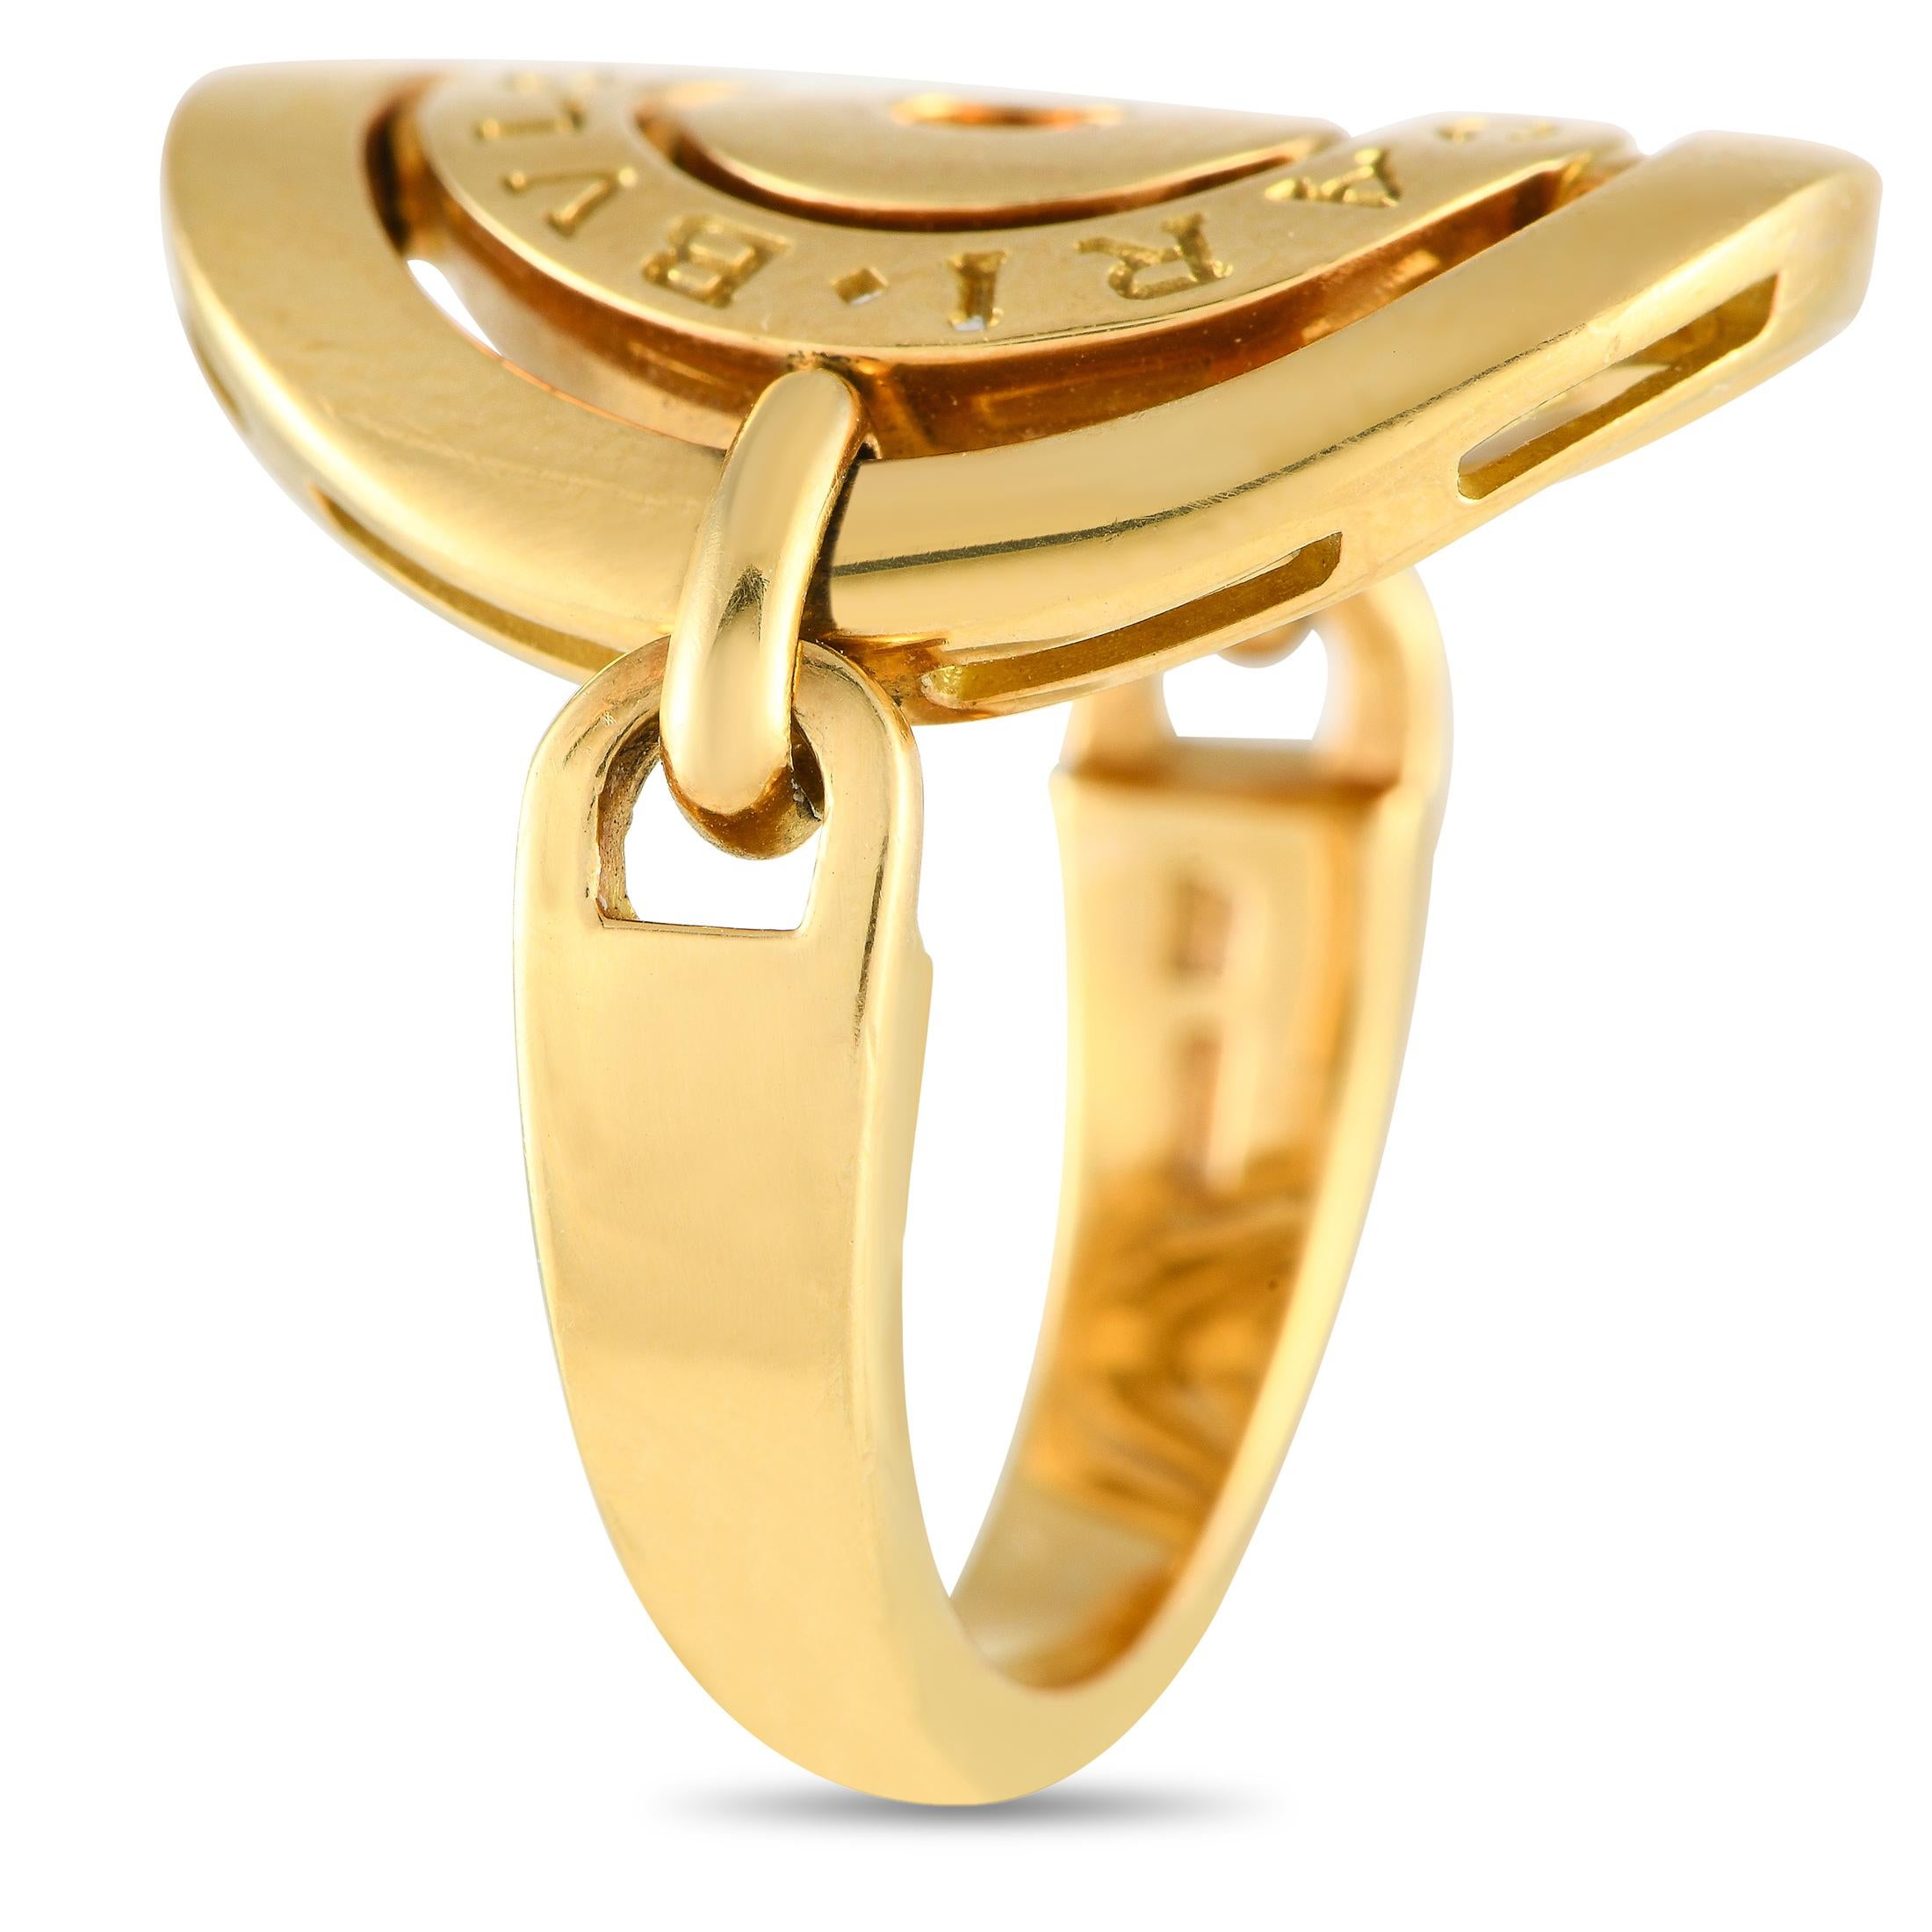 Add interest to your wardrobe with this unusual yet elegant ring. It is from Bvlgari's Astrale collection and is fully crafted in 18K yellow gold. The ring has a 3mm-thick band with swiveling shoulders that hold an openwork centerpiece made of three